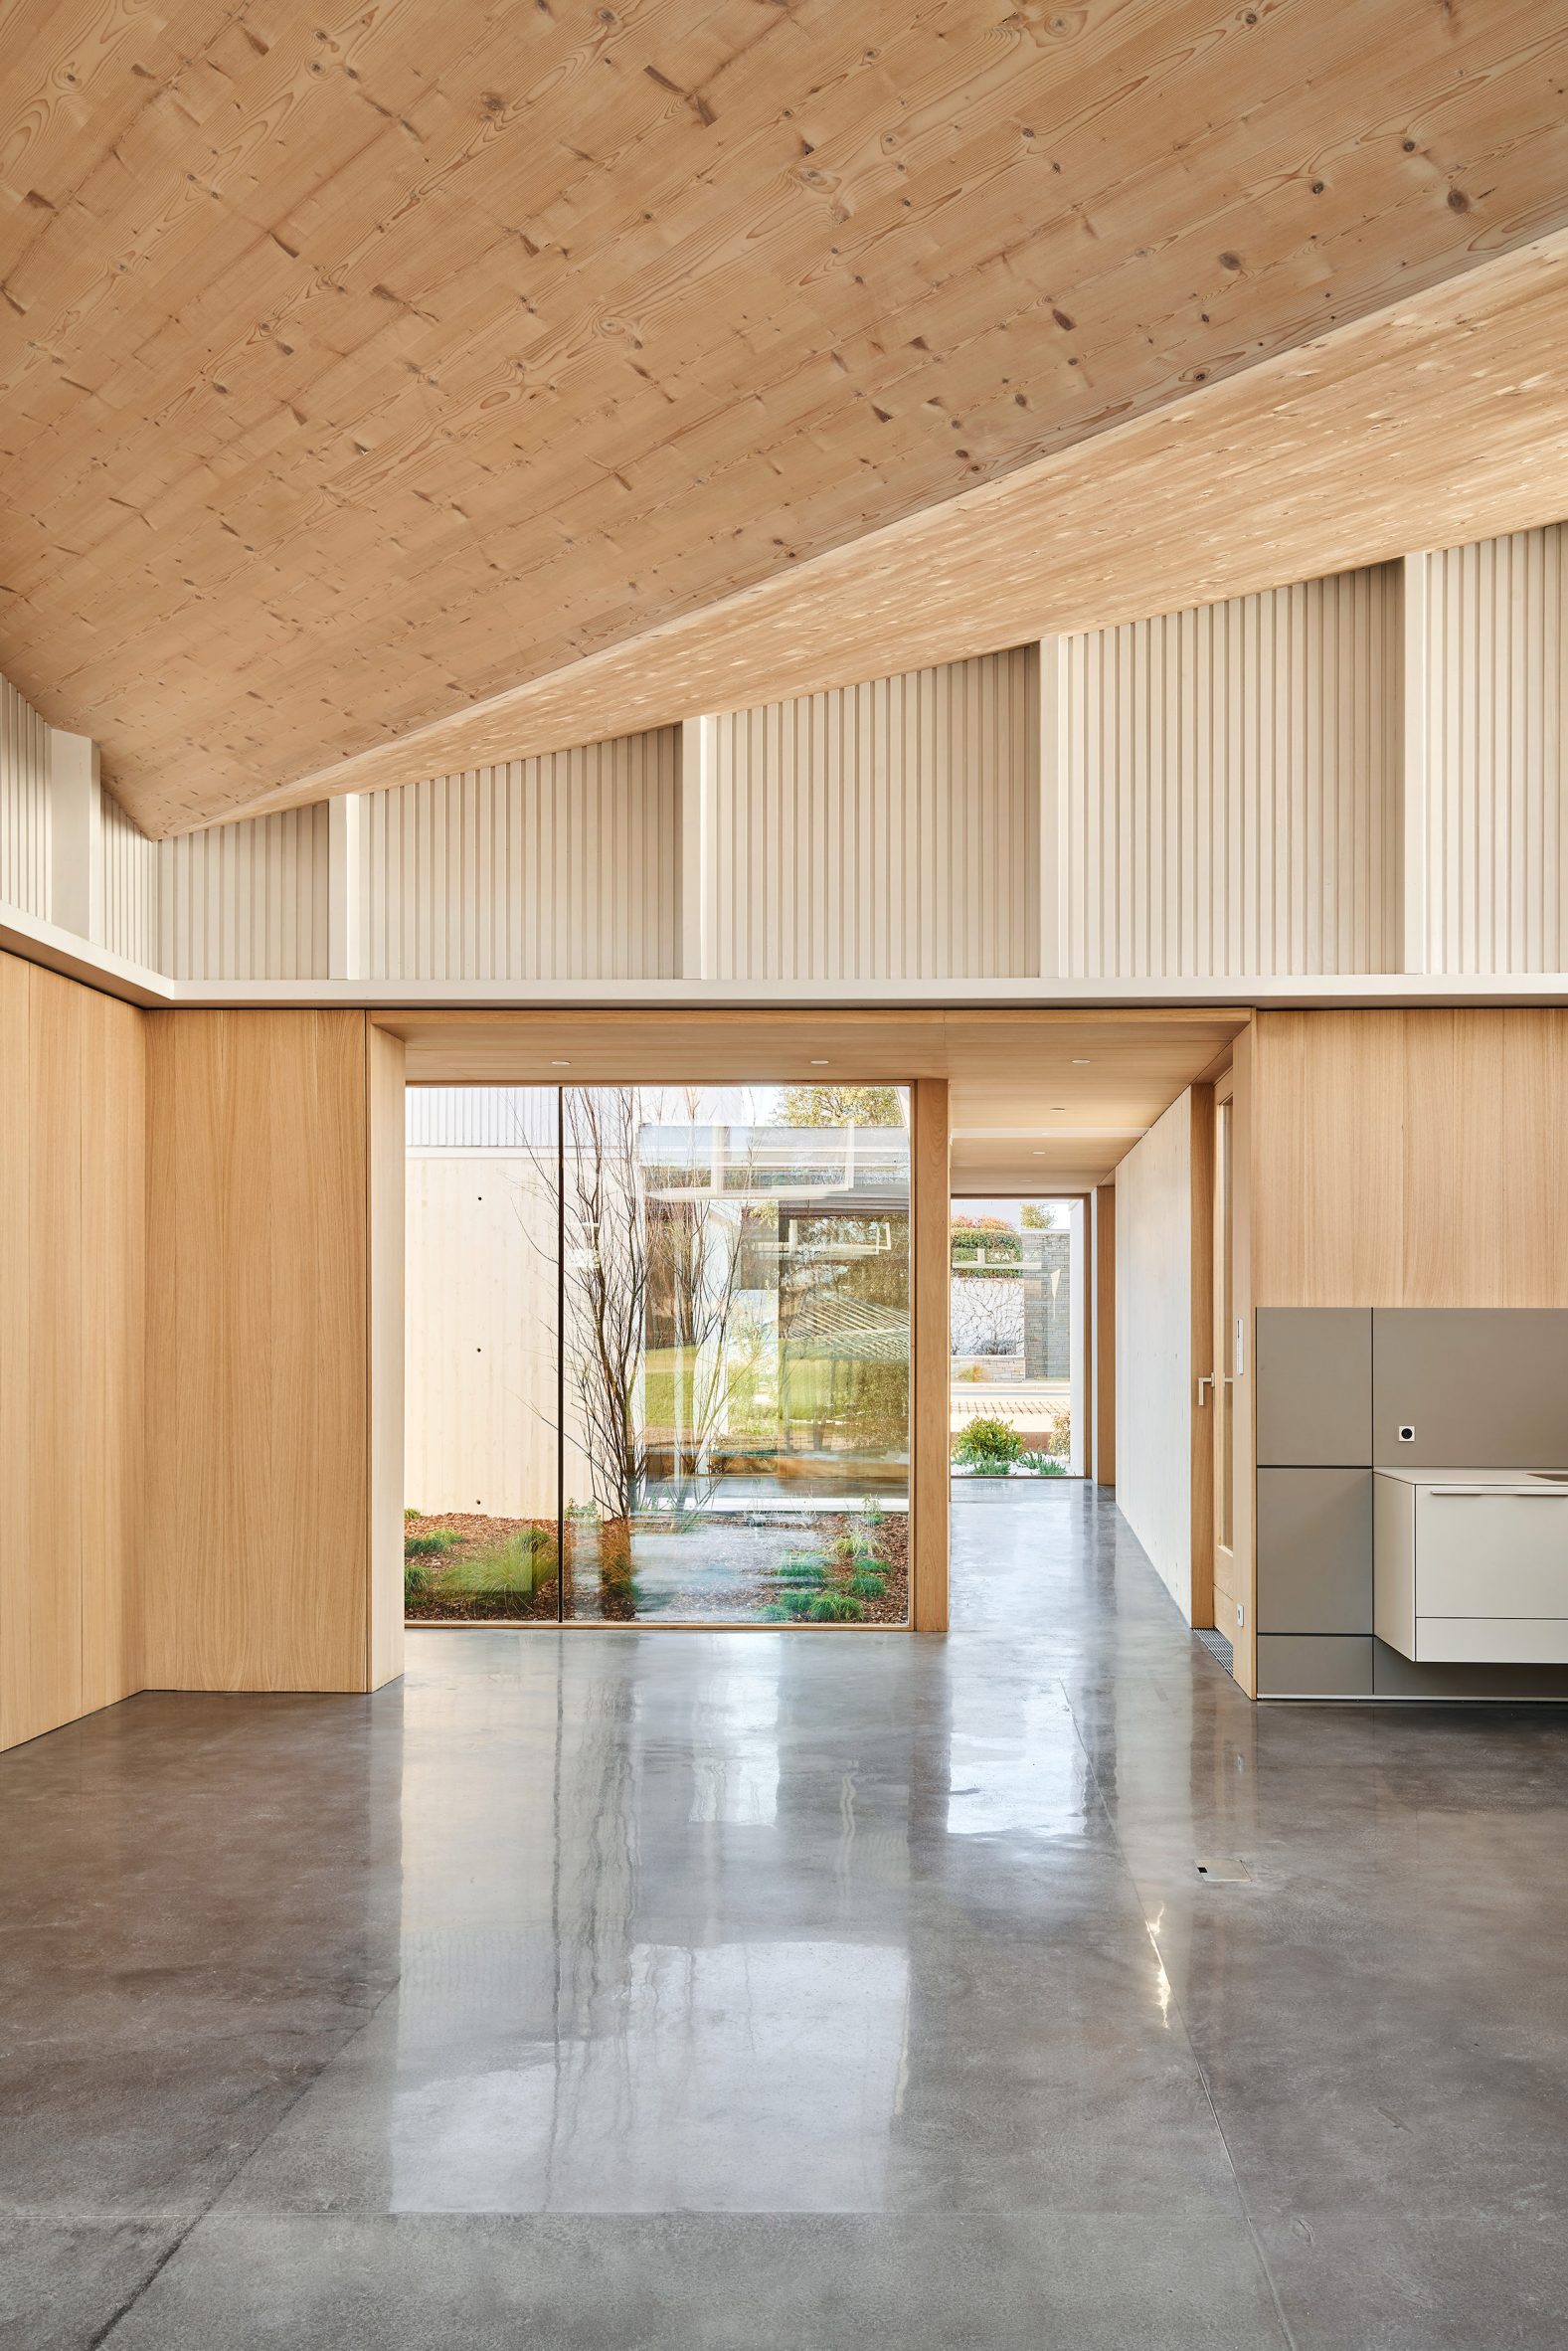 Home interior with a mono-pitched timber roof and concrete floors by Arquitecturia